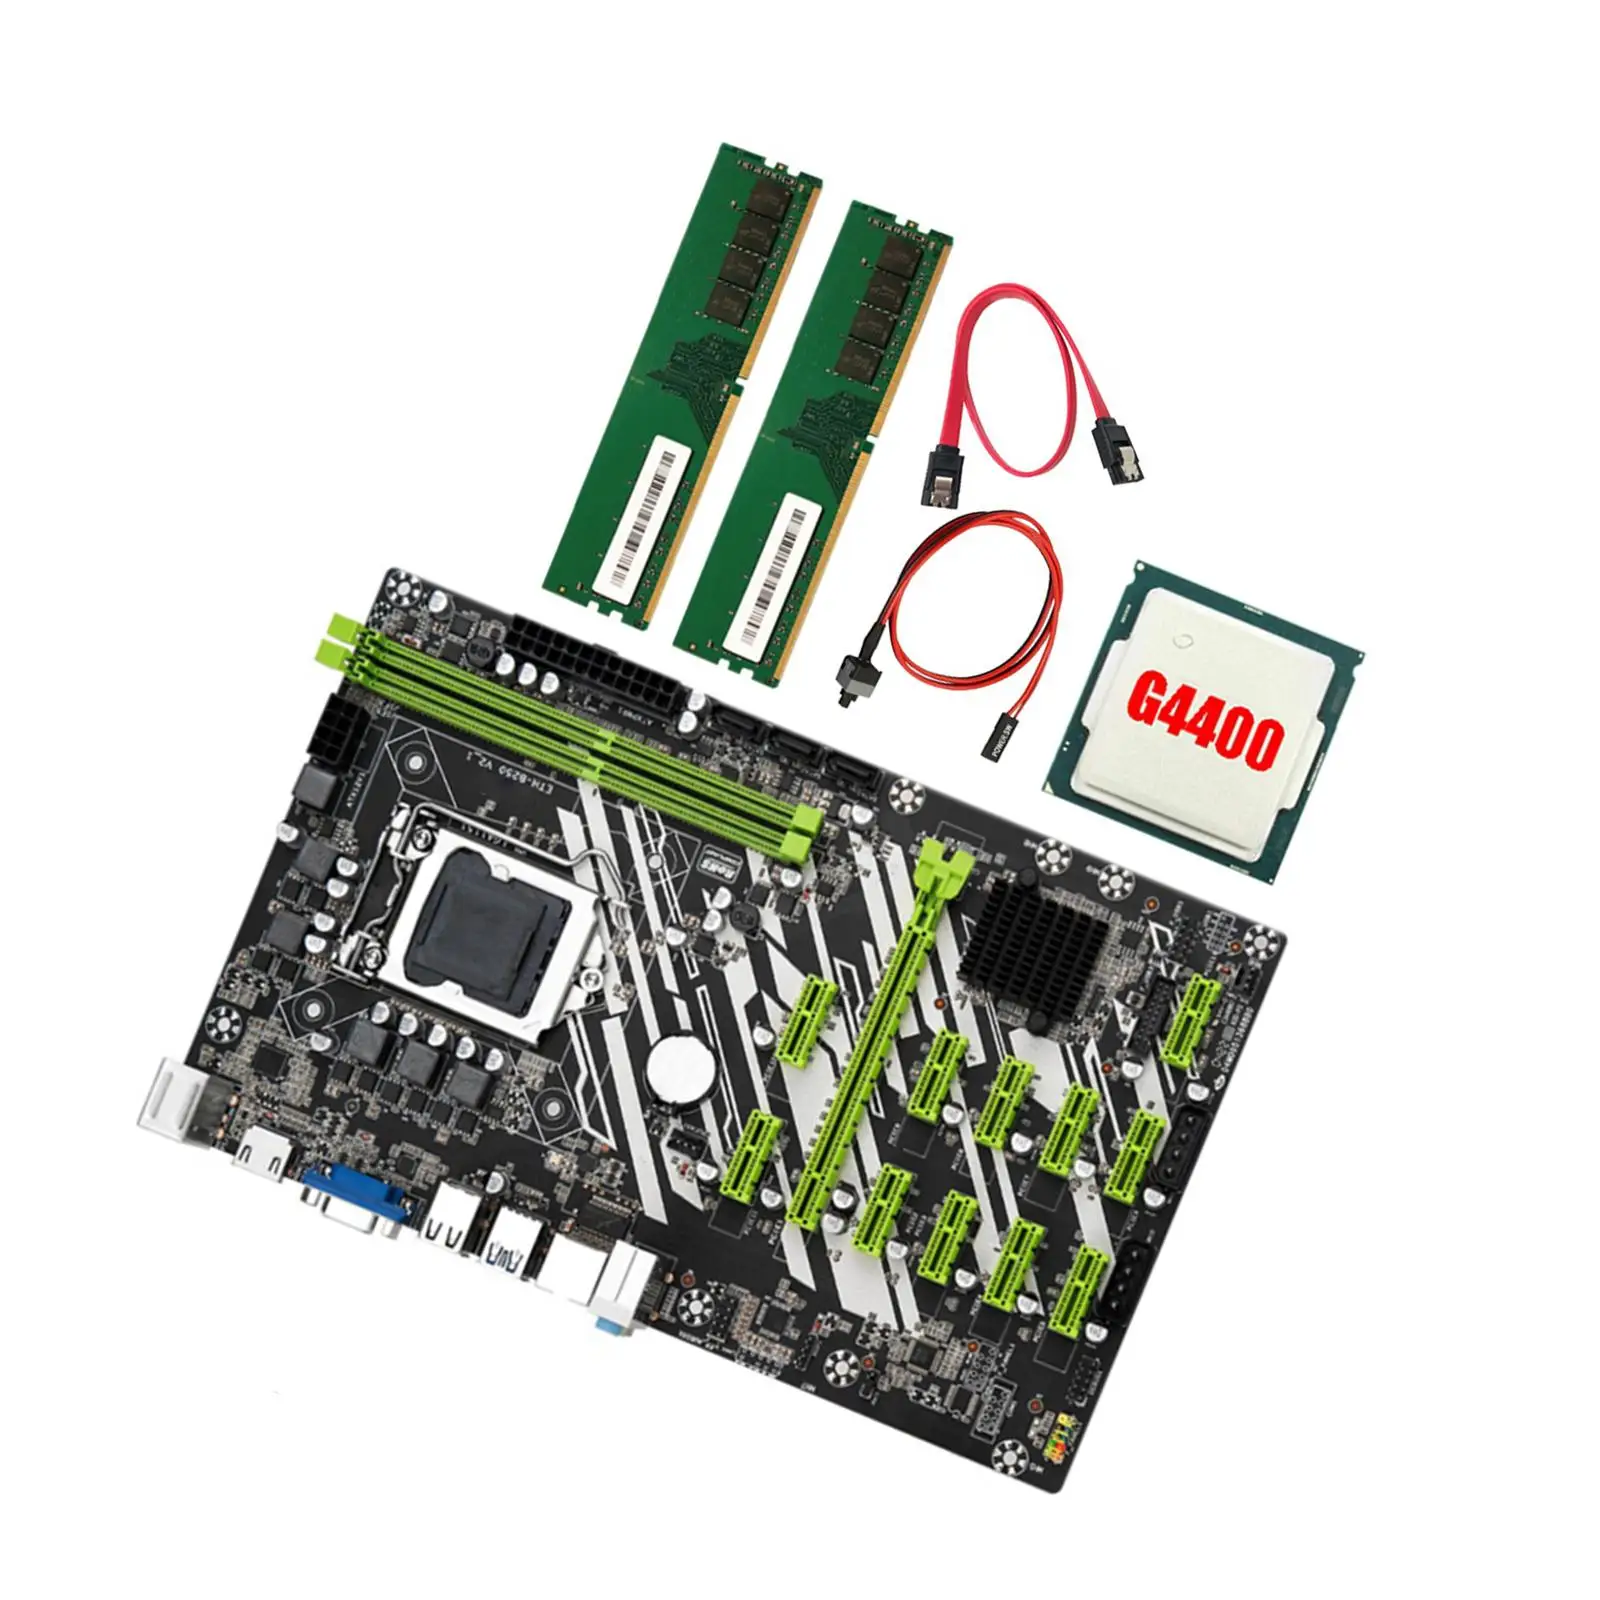 Desktop Motherboard 1x PCIe 16x Slot Dual Channel DDR4 Mainboard Replaces